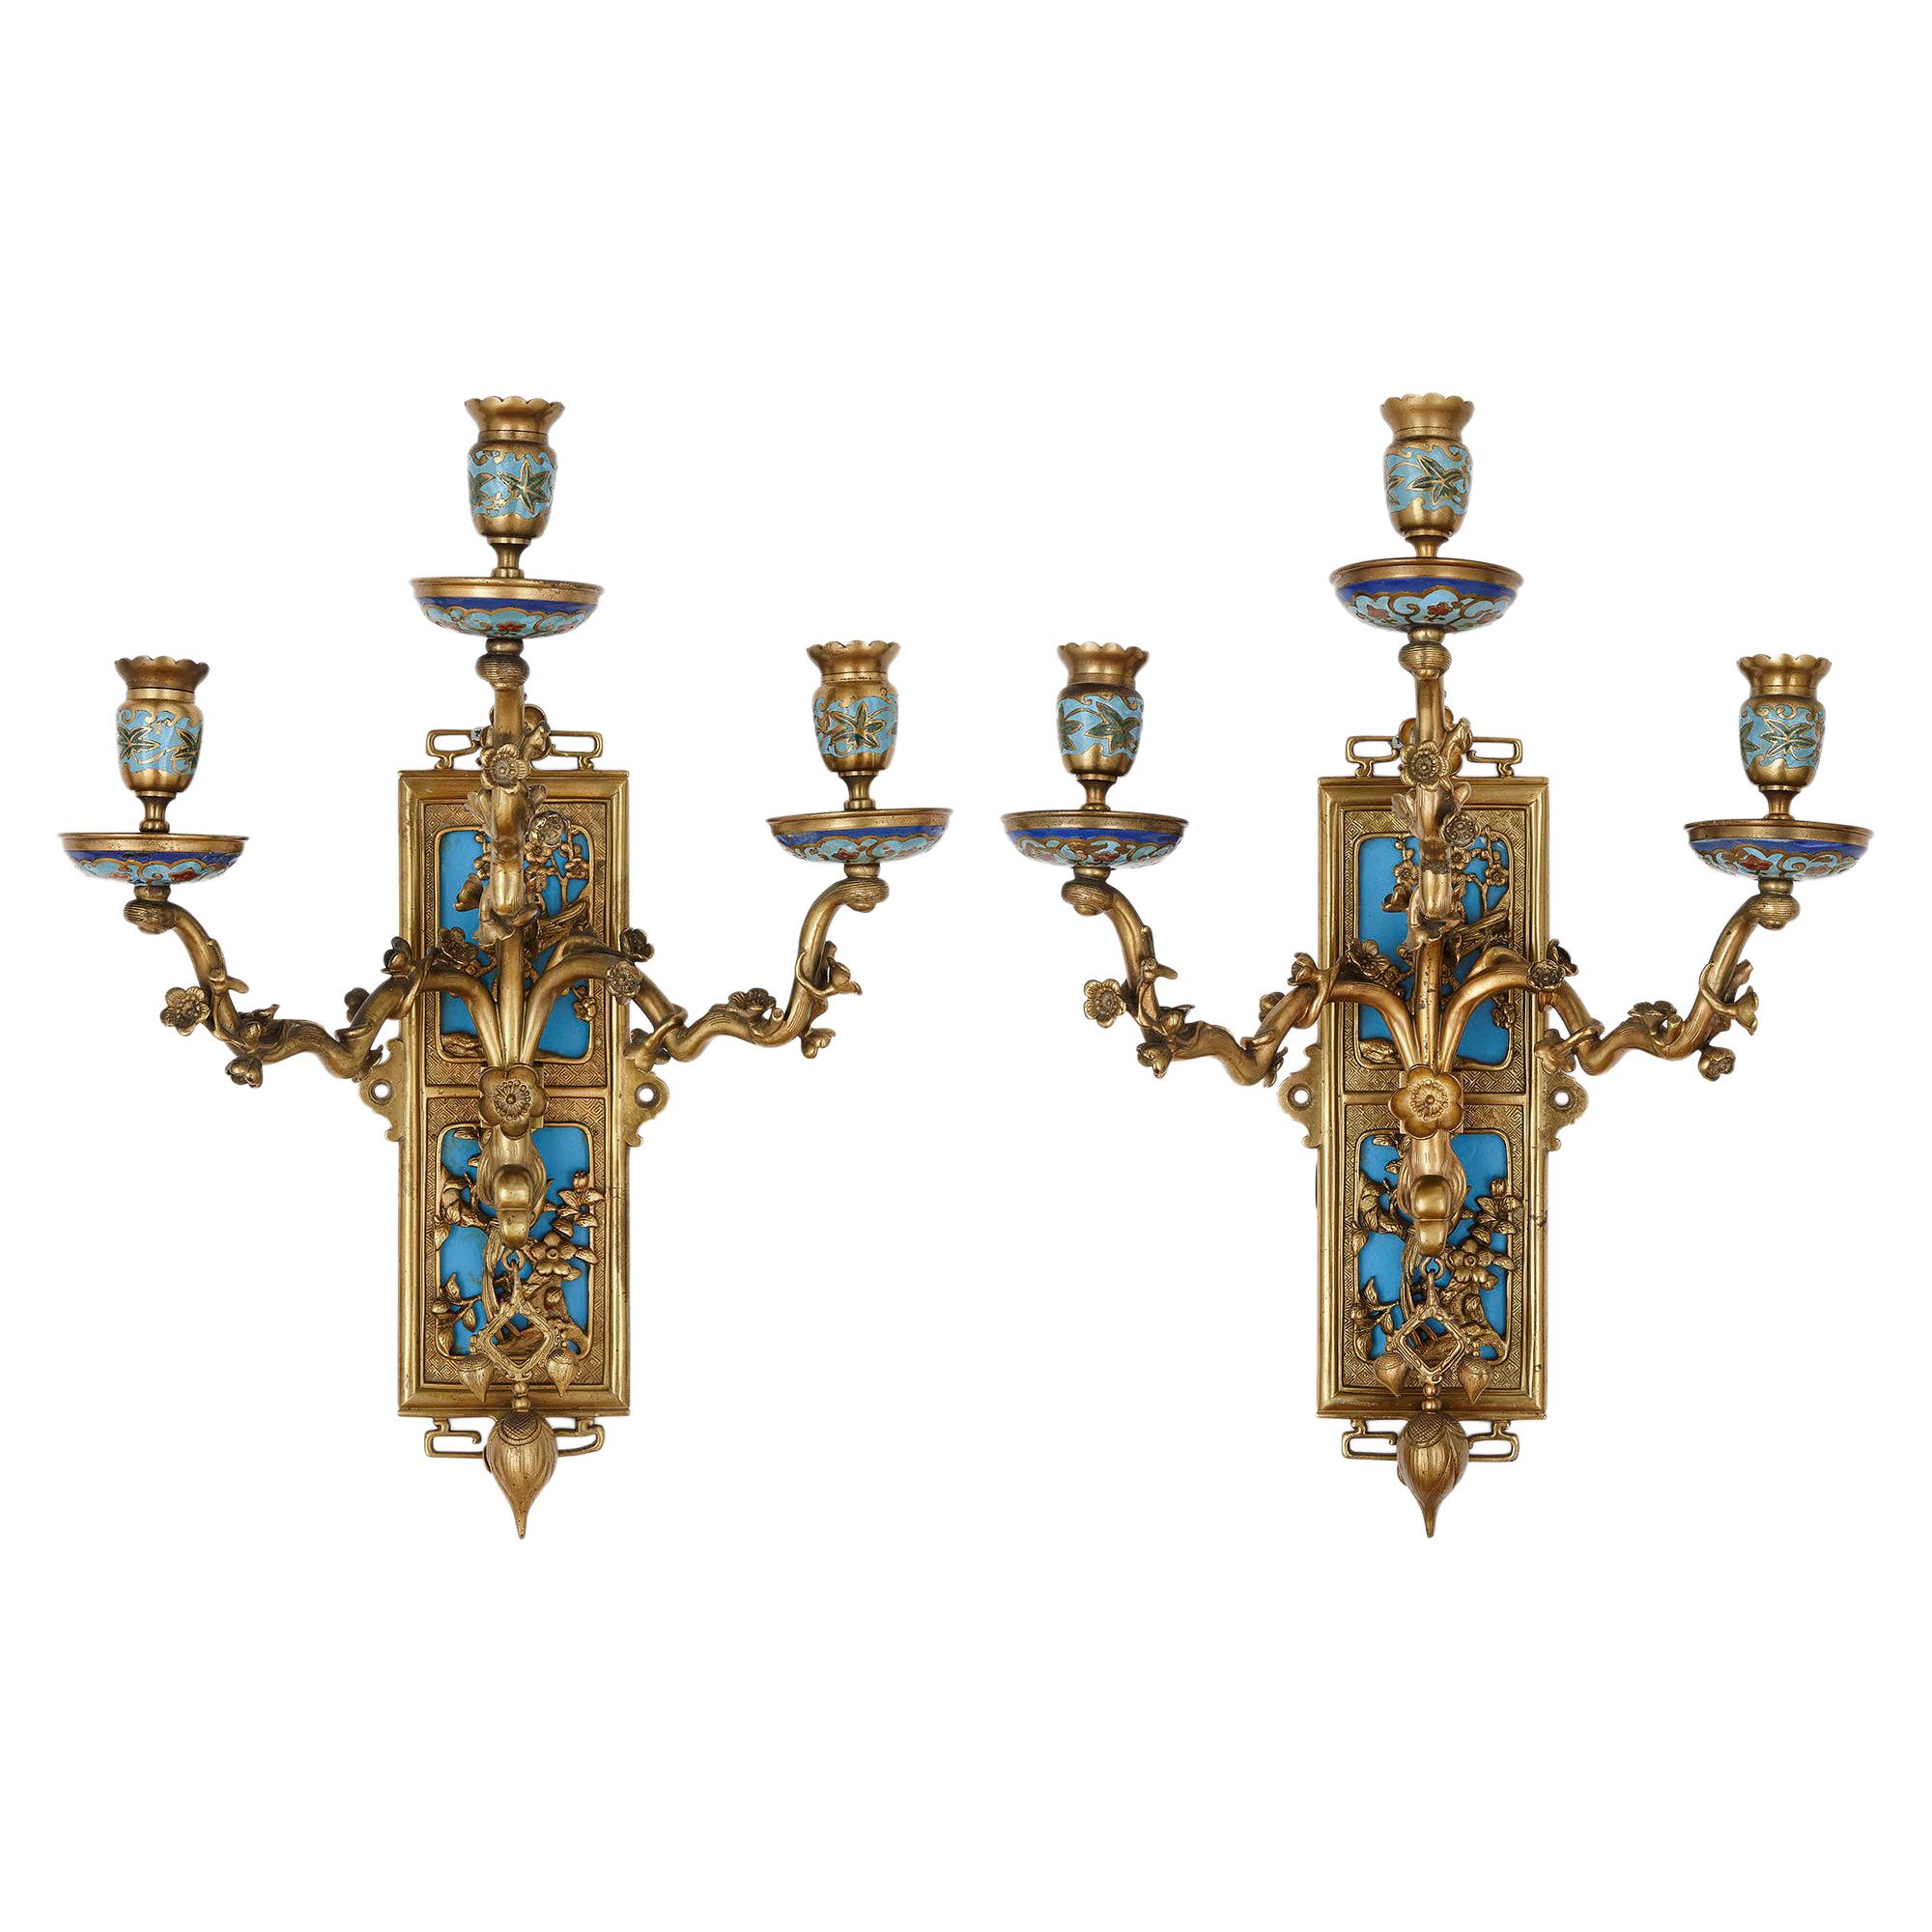 Pair of Gilt Bronze and Enamel Sconces in the Japonisme Style